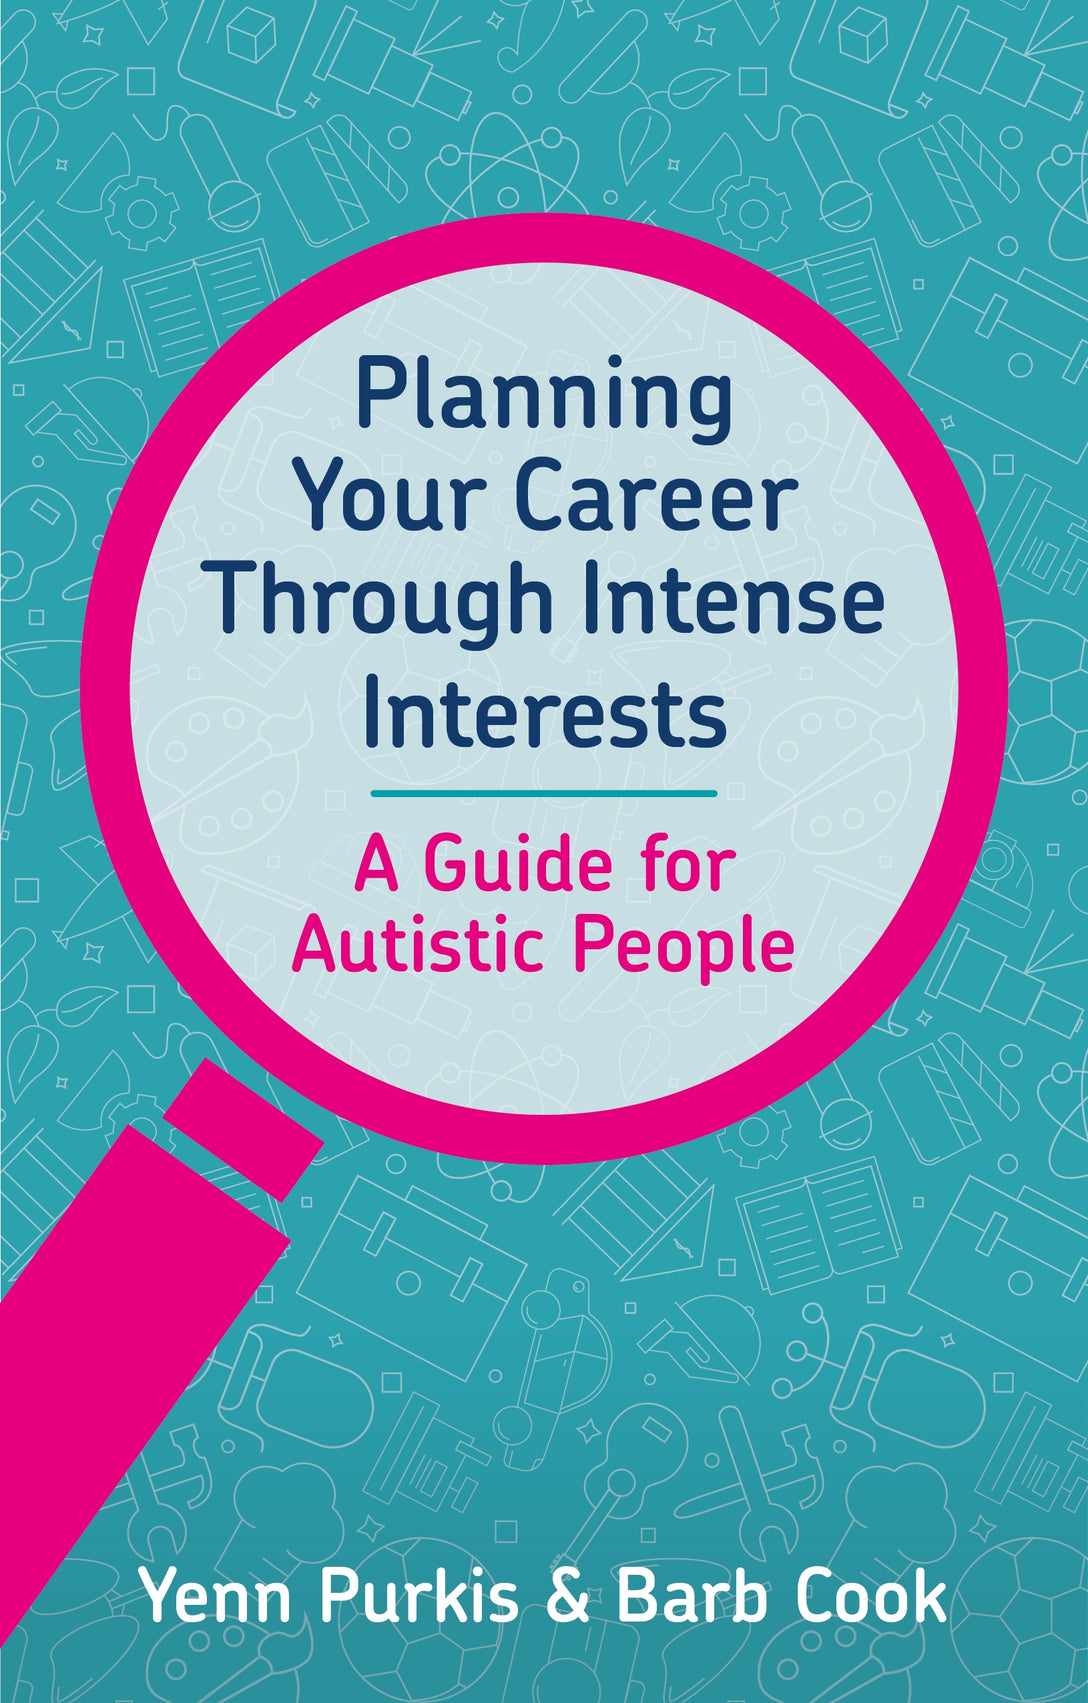 Planning Your Career Through Intense Interests by Yenn Purkis, Barb Cook